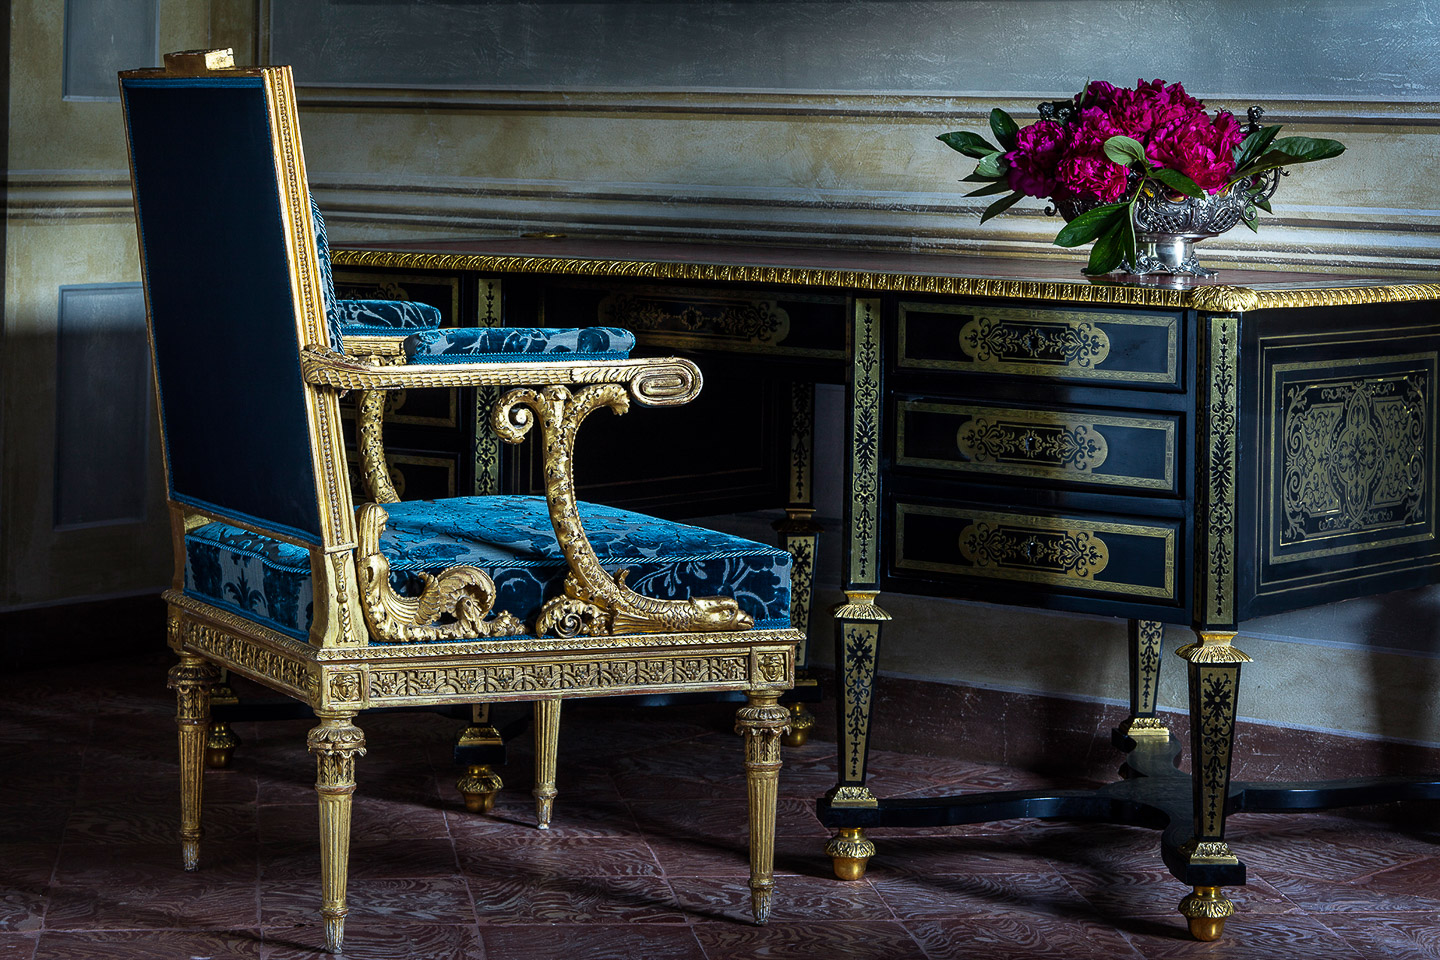 Villa Balbiano elegant lake Como property offering accommodation sumptuous interior design luxury master suite Louis XIV period desk blue chair from Habsburg royal family collection 20000VB int